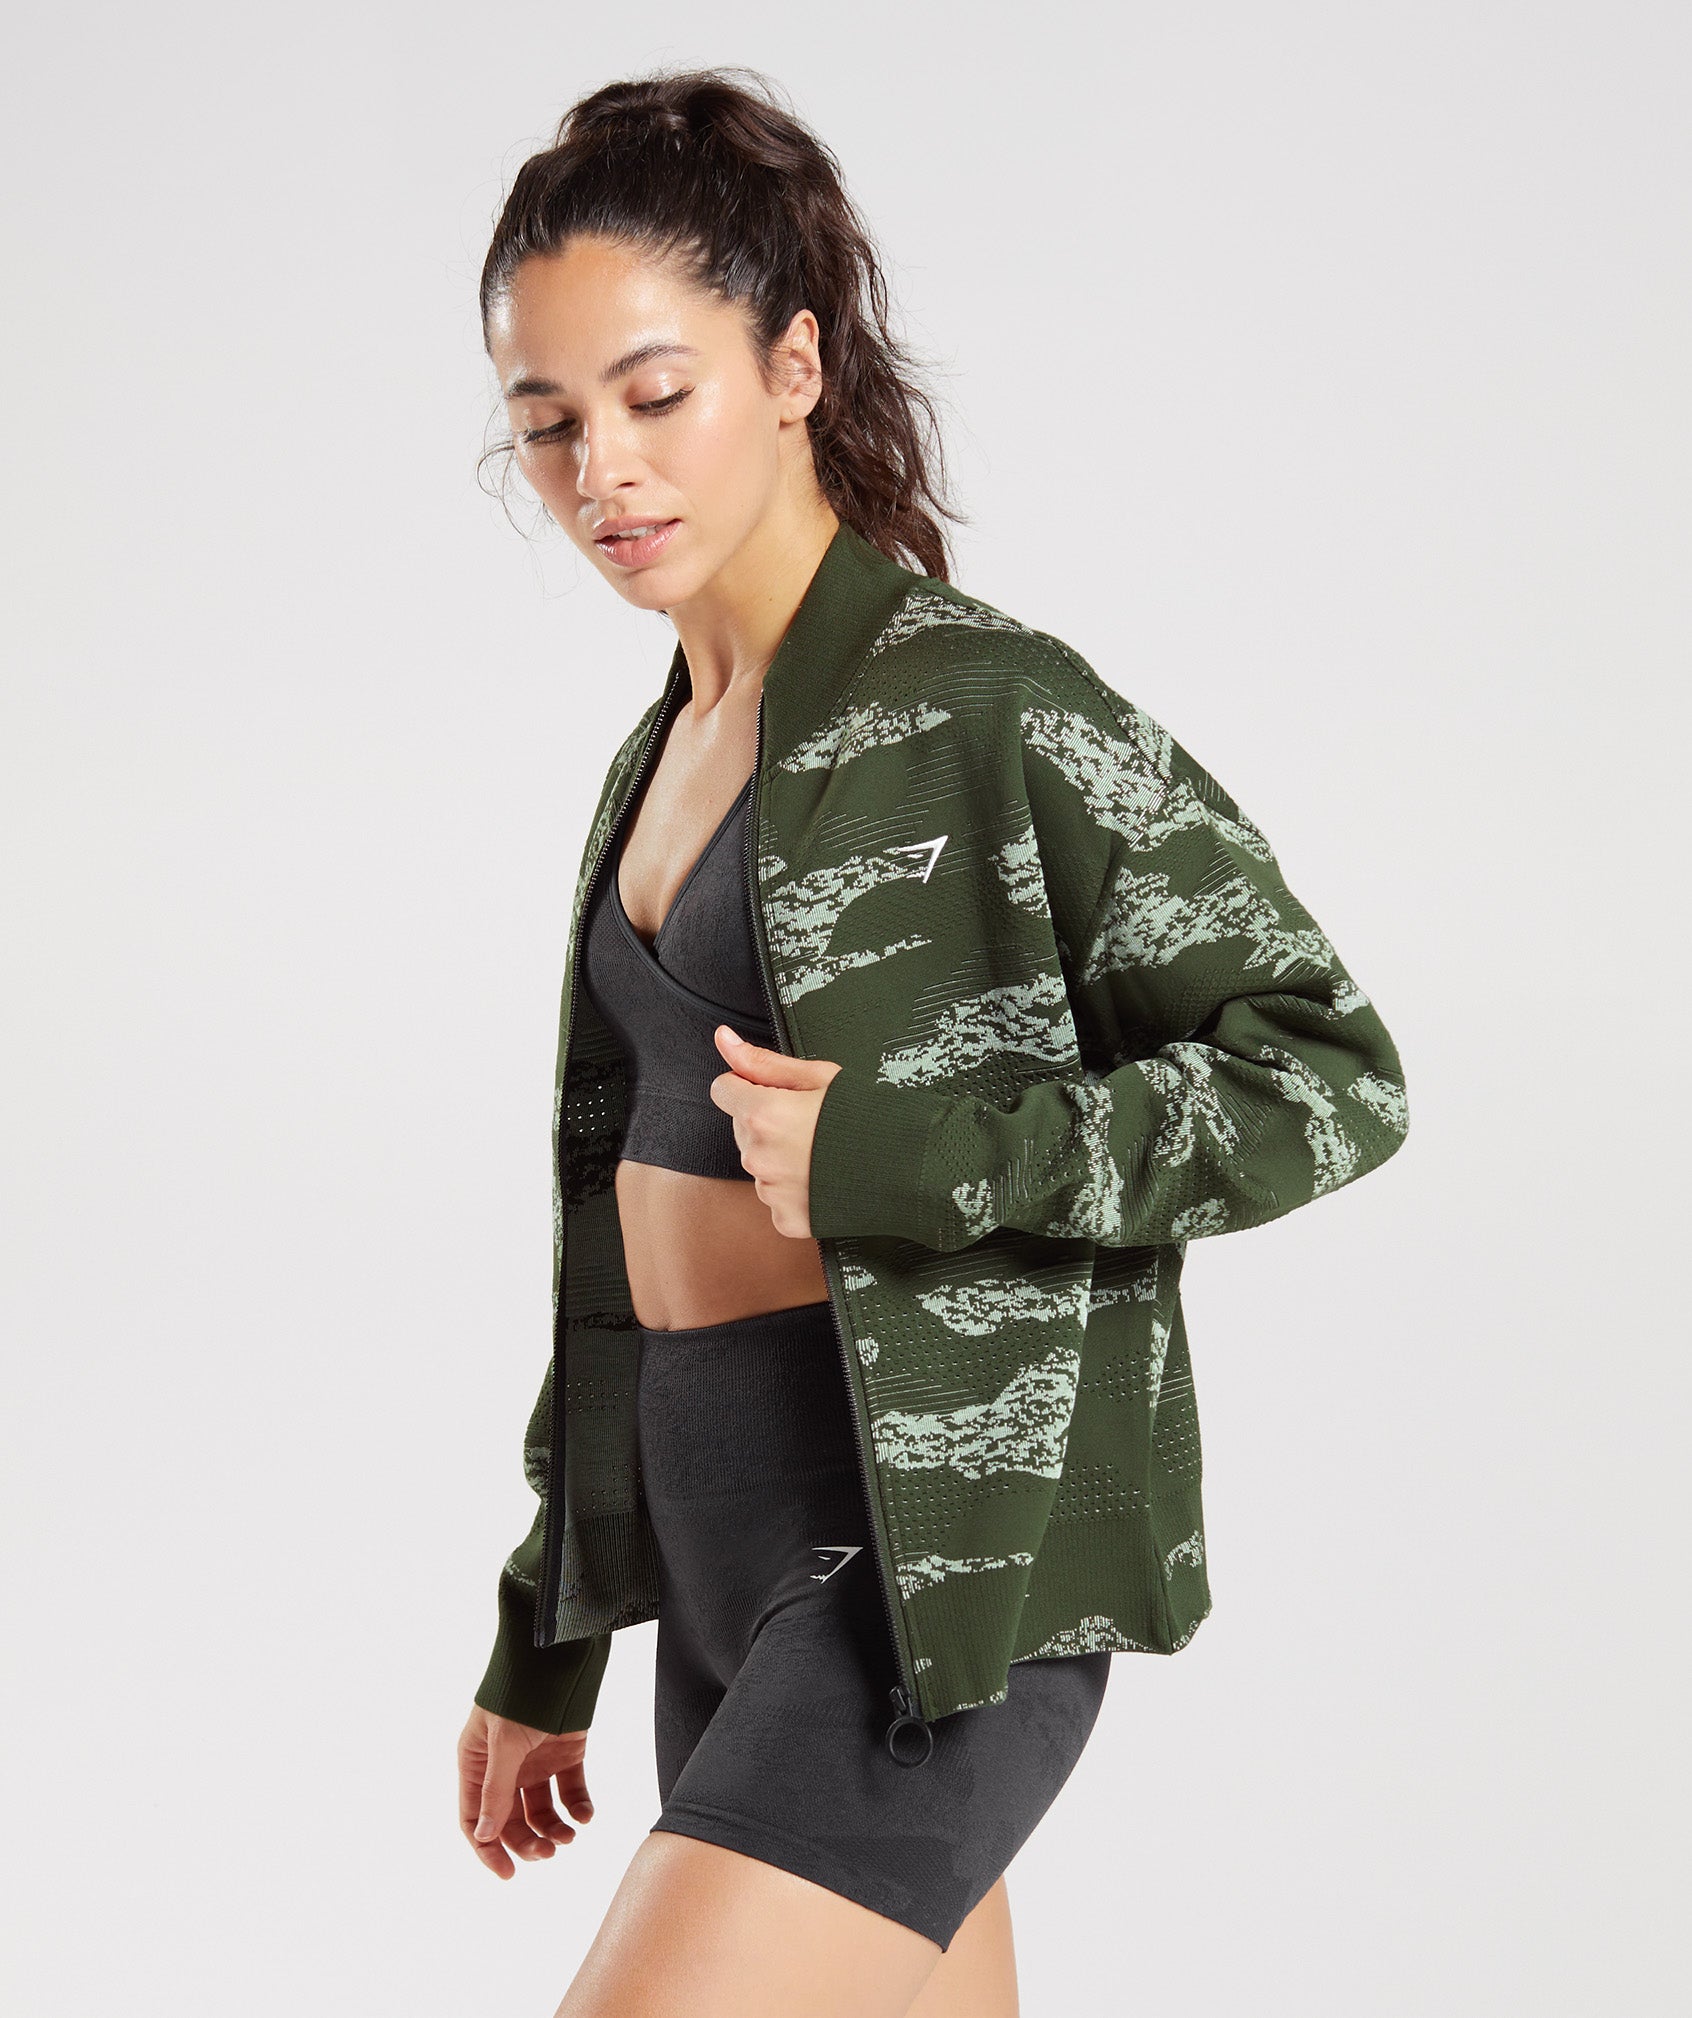 Adapt Camo Seamless Track Jacket in Moss Olive/Aloe Green - view 3